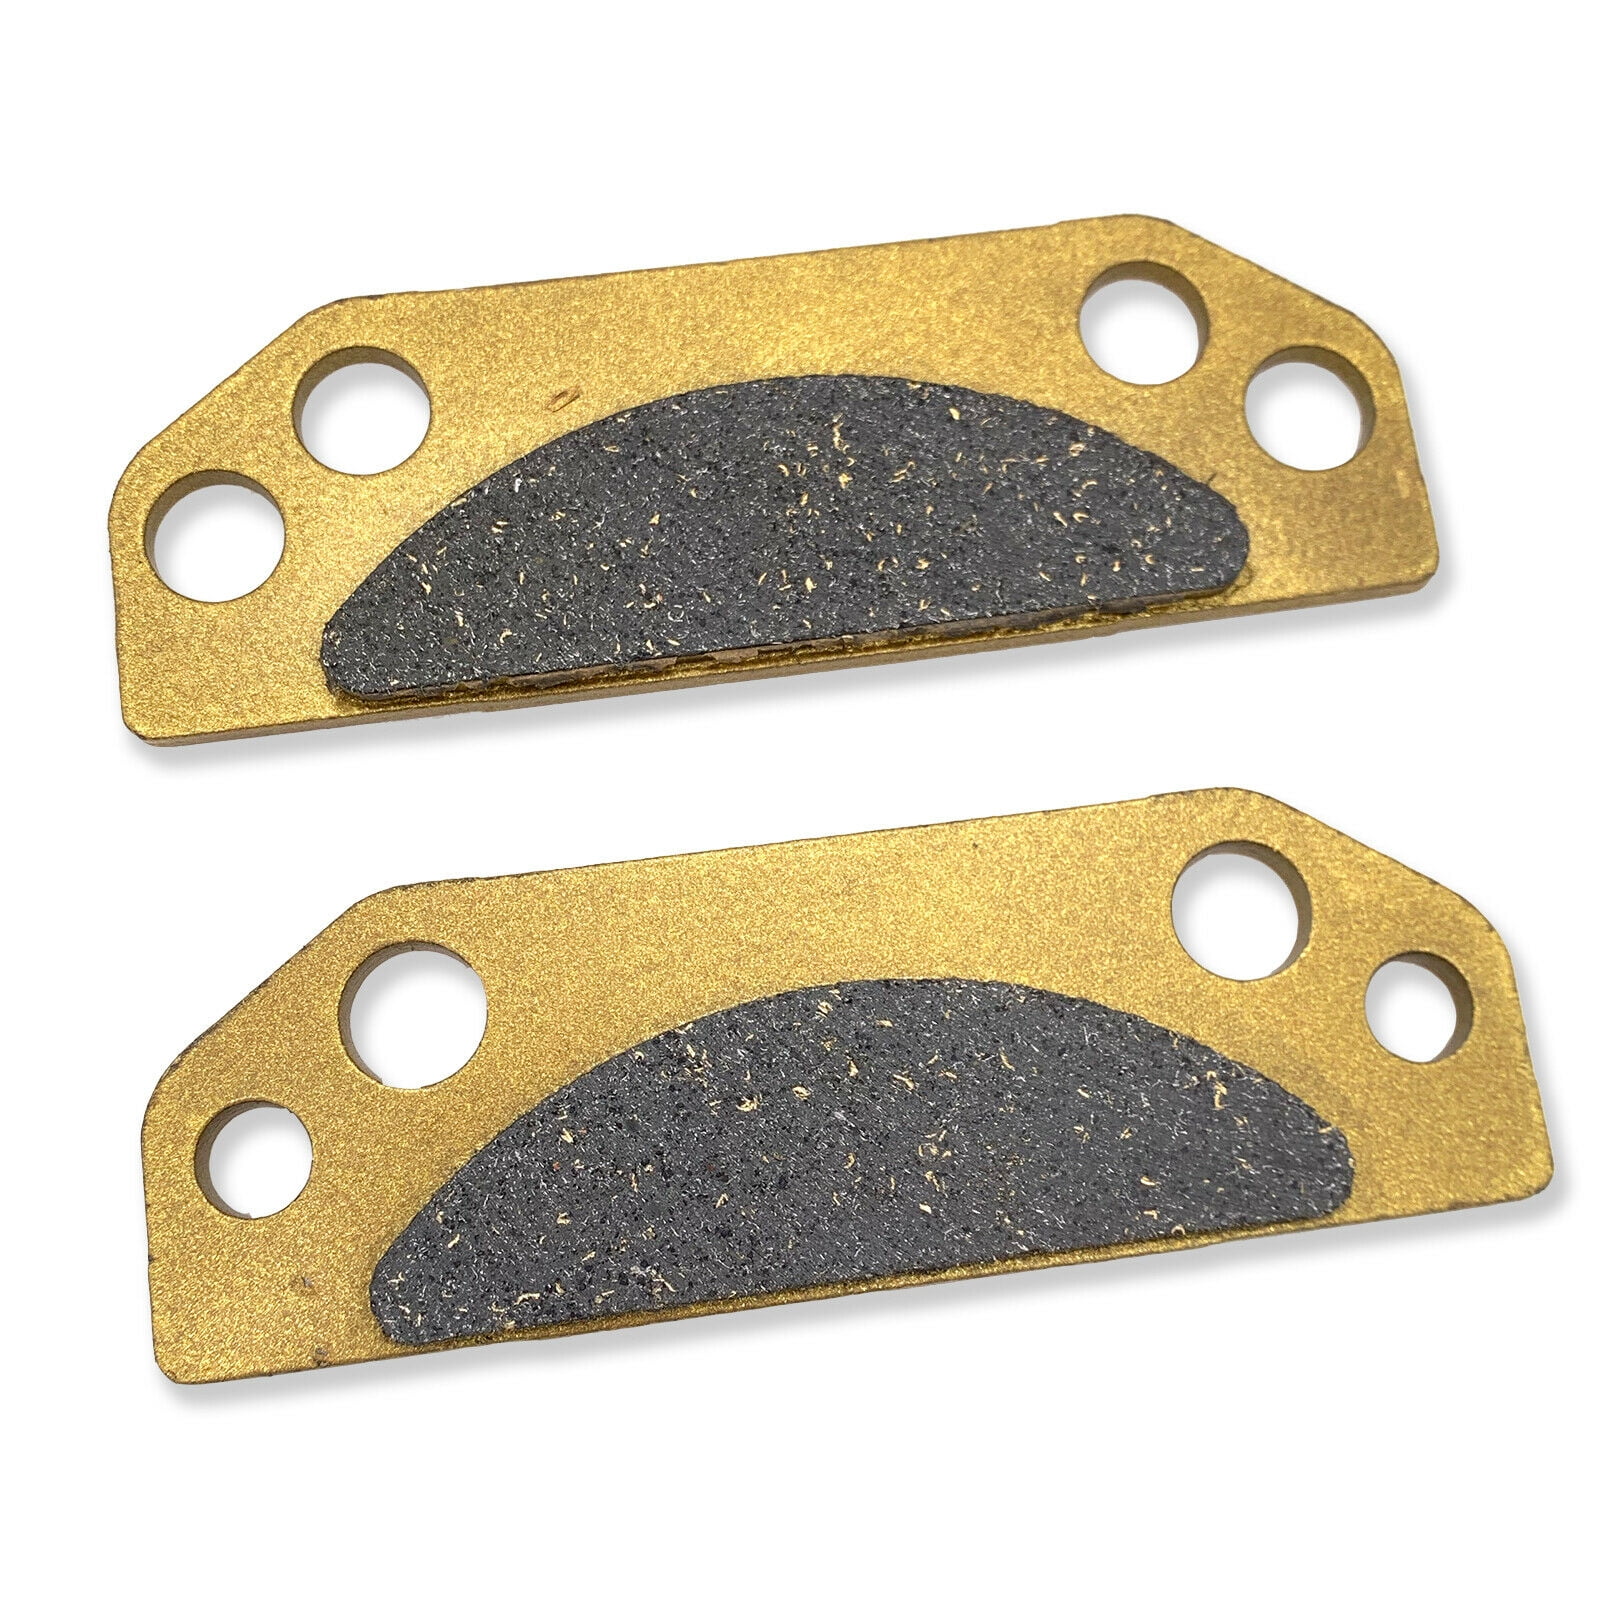 2009 Polaris Ranger 700 4X4 Front and Rear Severe Duty Brake Pads